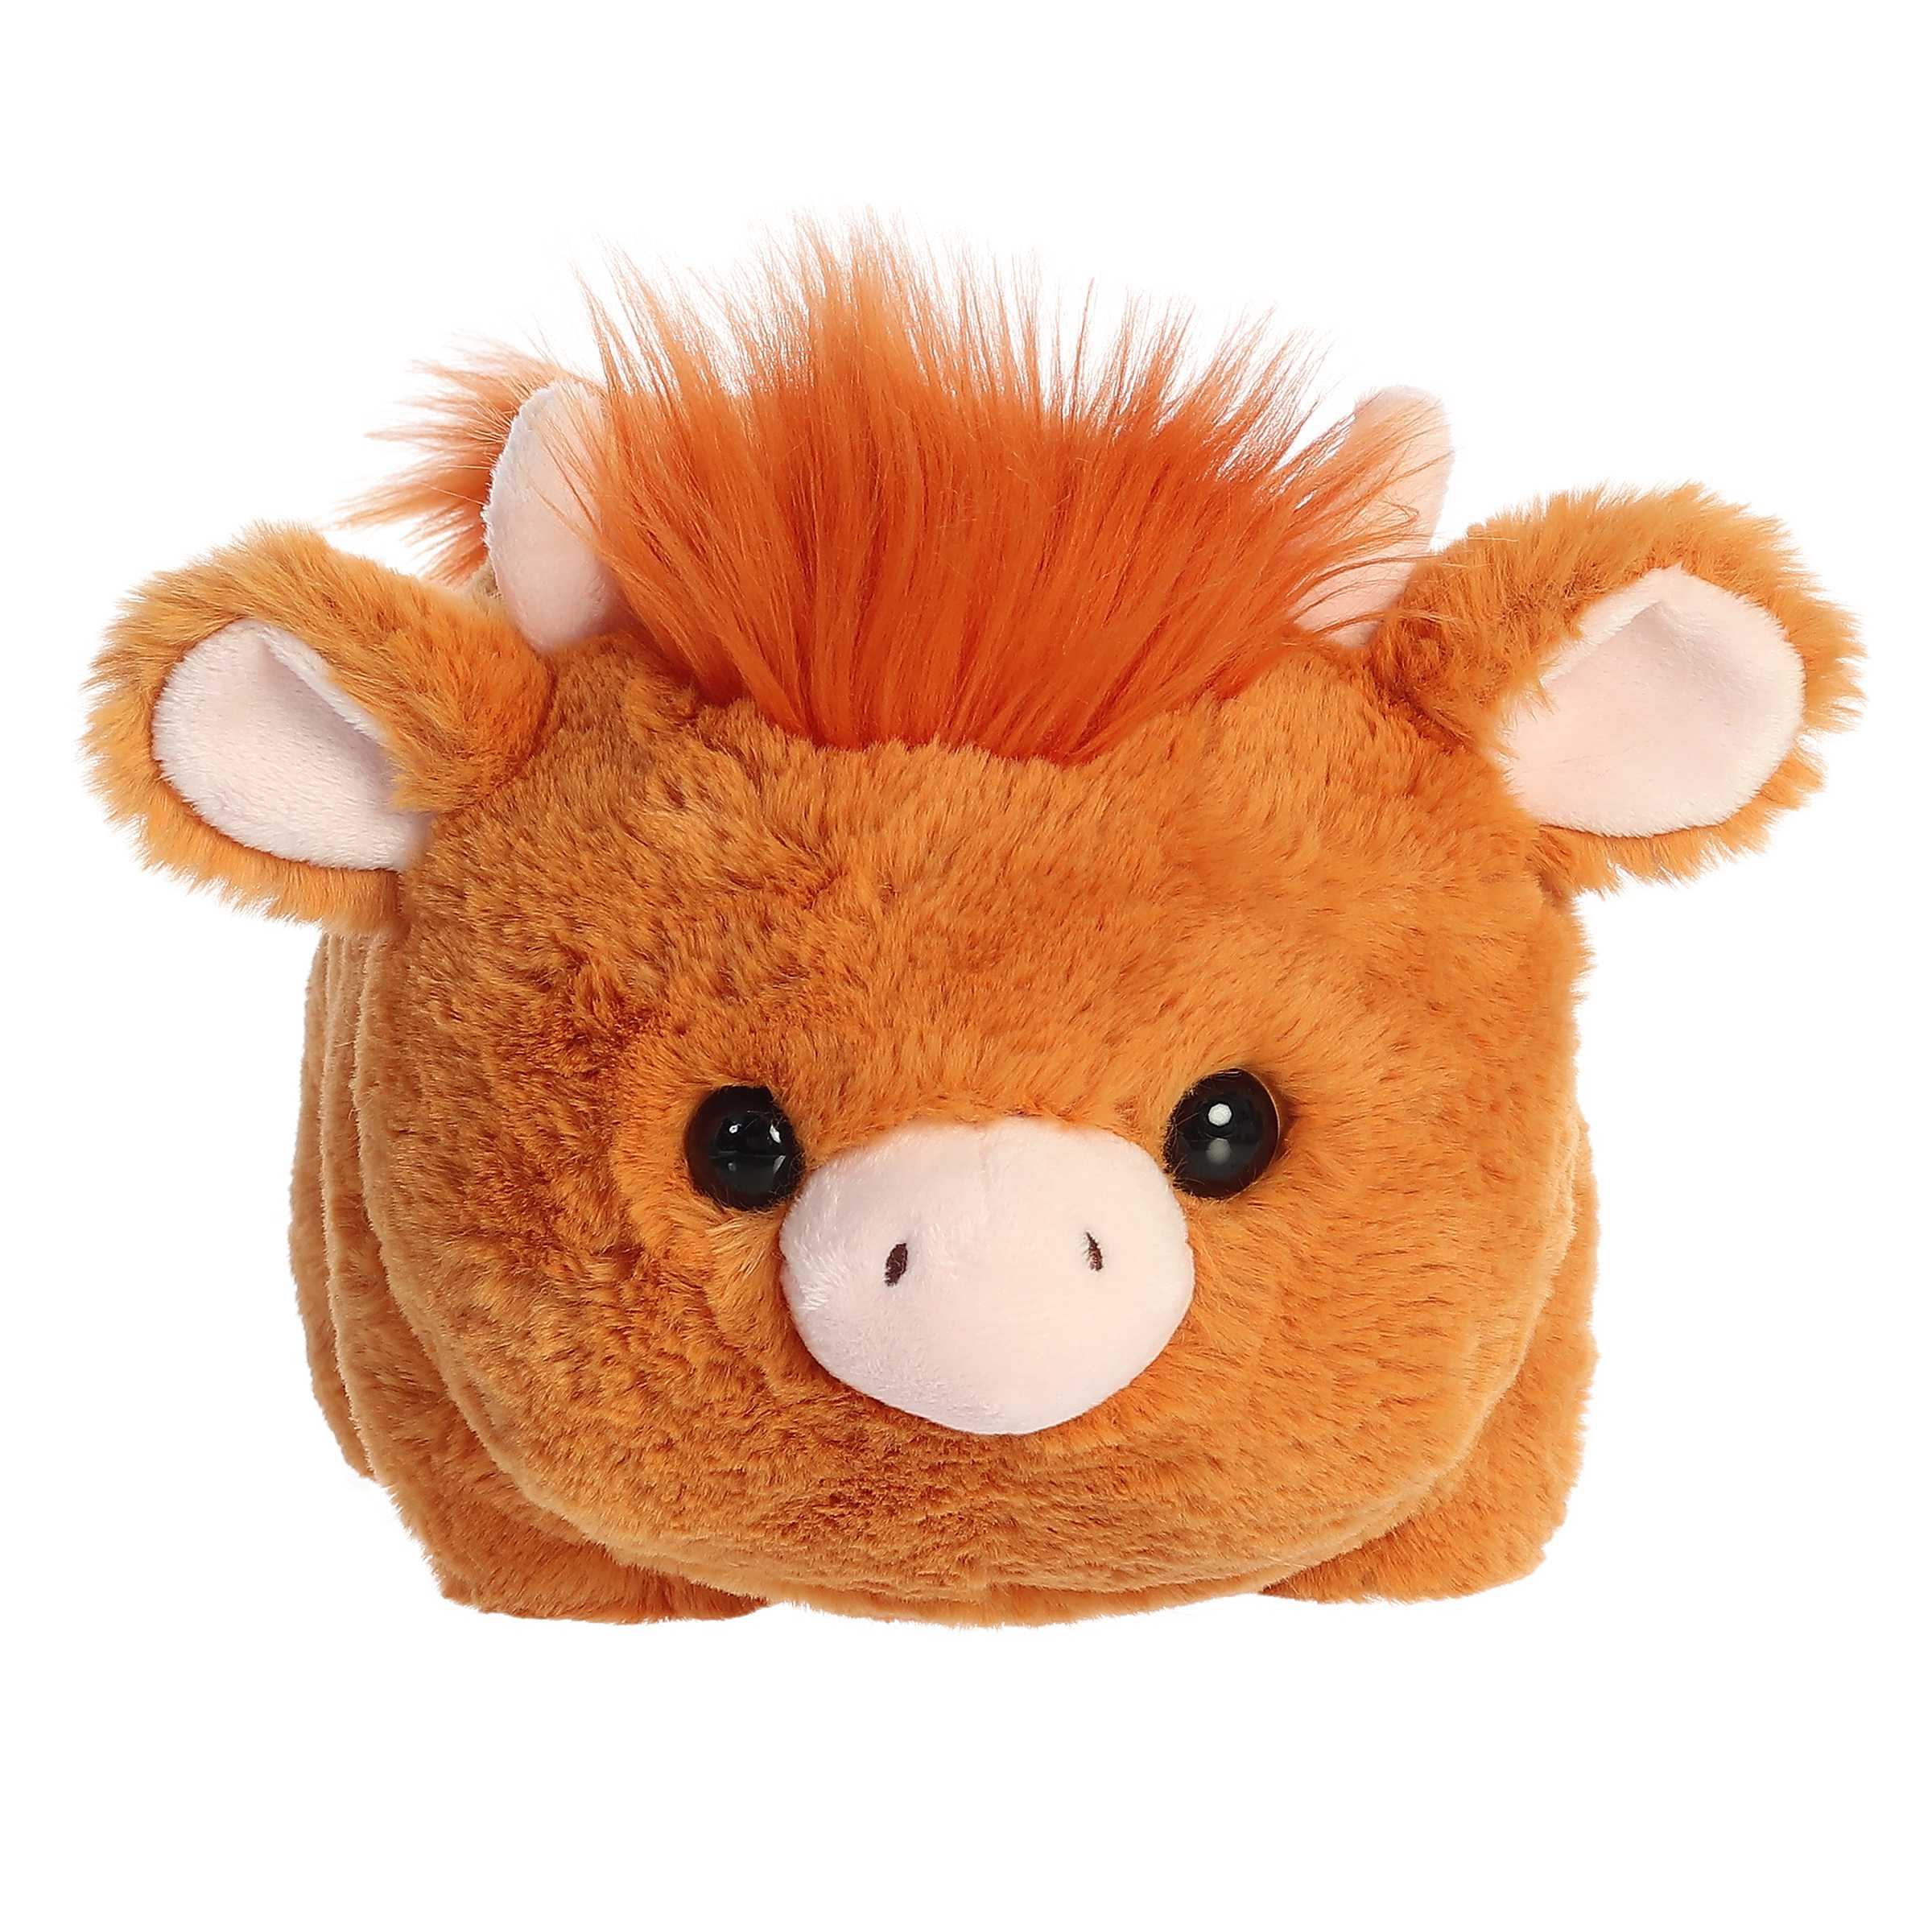 Stuffed Animal Highland Cow Plush 10 inch Realistic Cow Plush Toy Cuddly  Highland Cow Farm Decor Birthday Gift for Adults Kids 